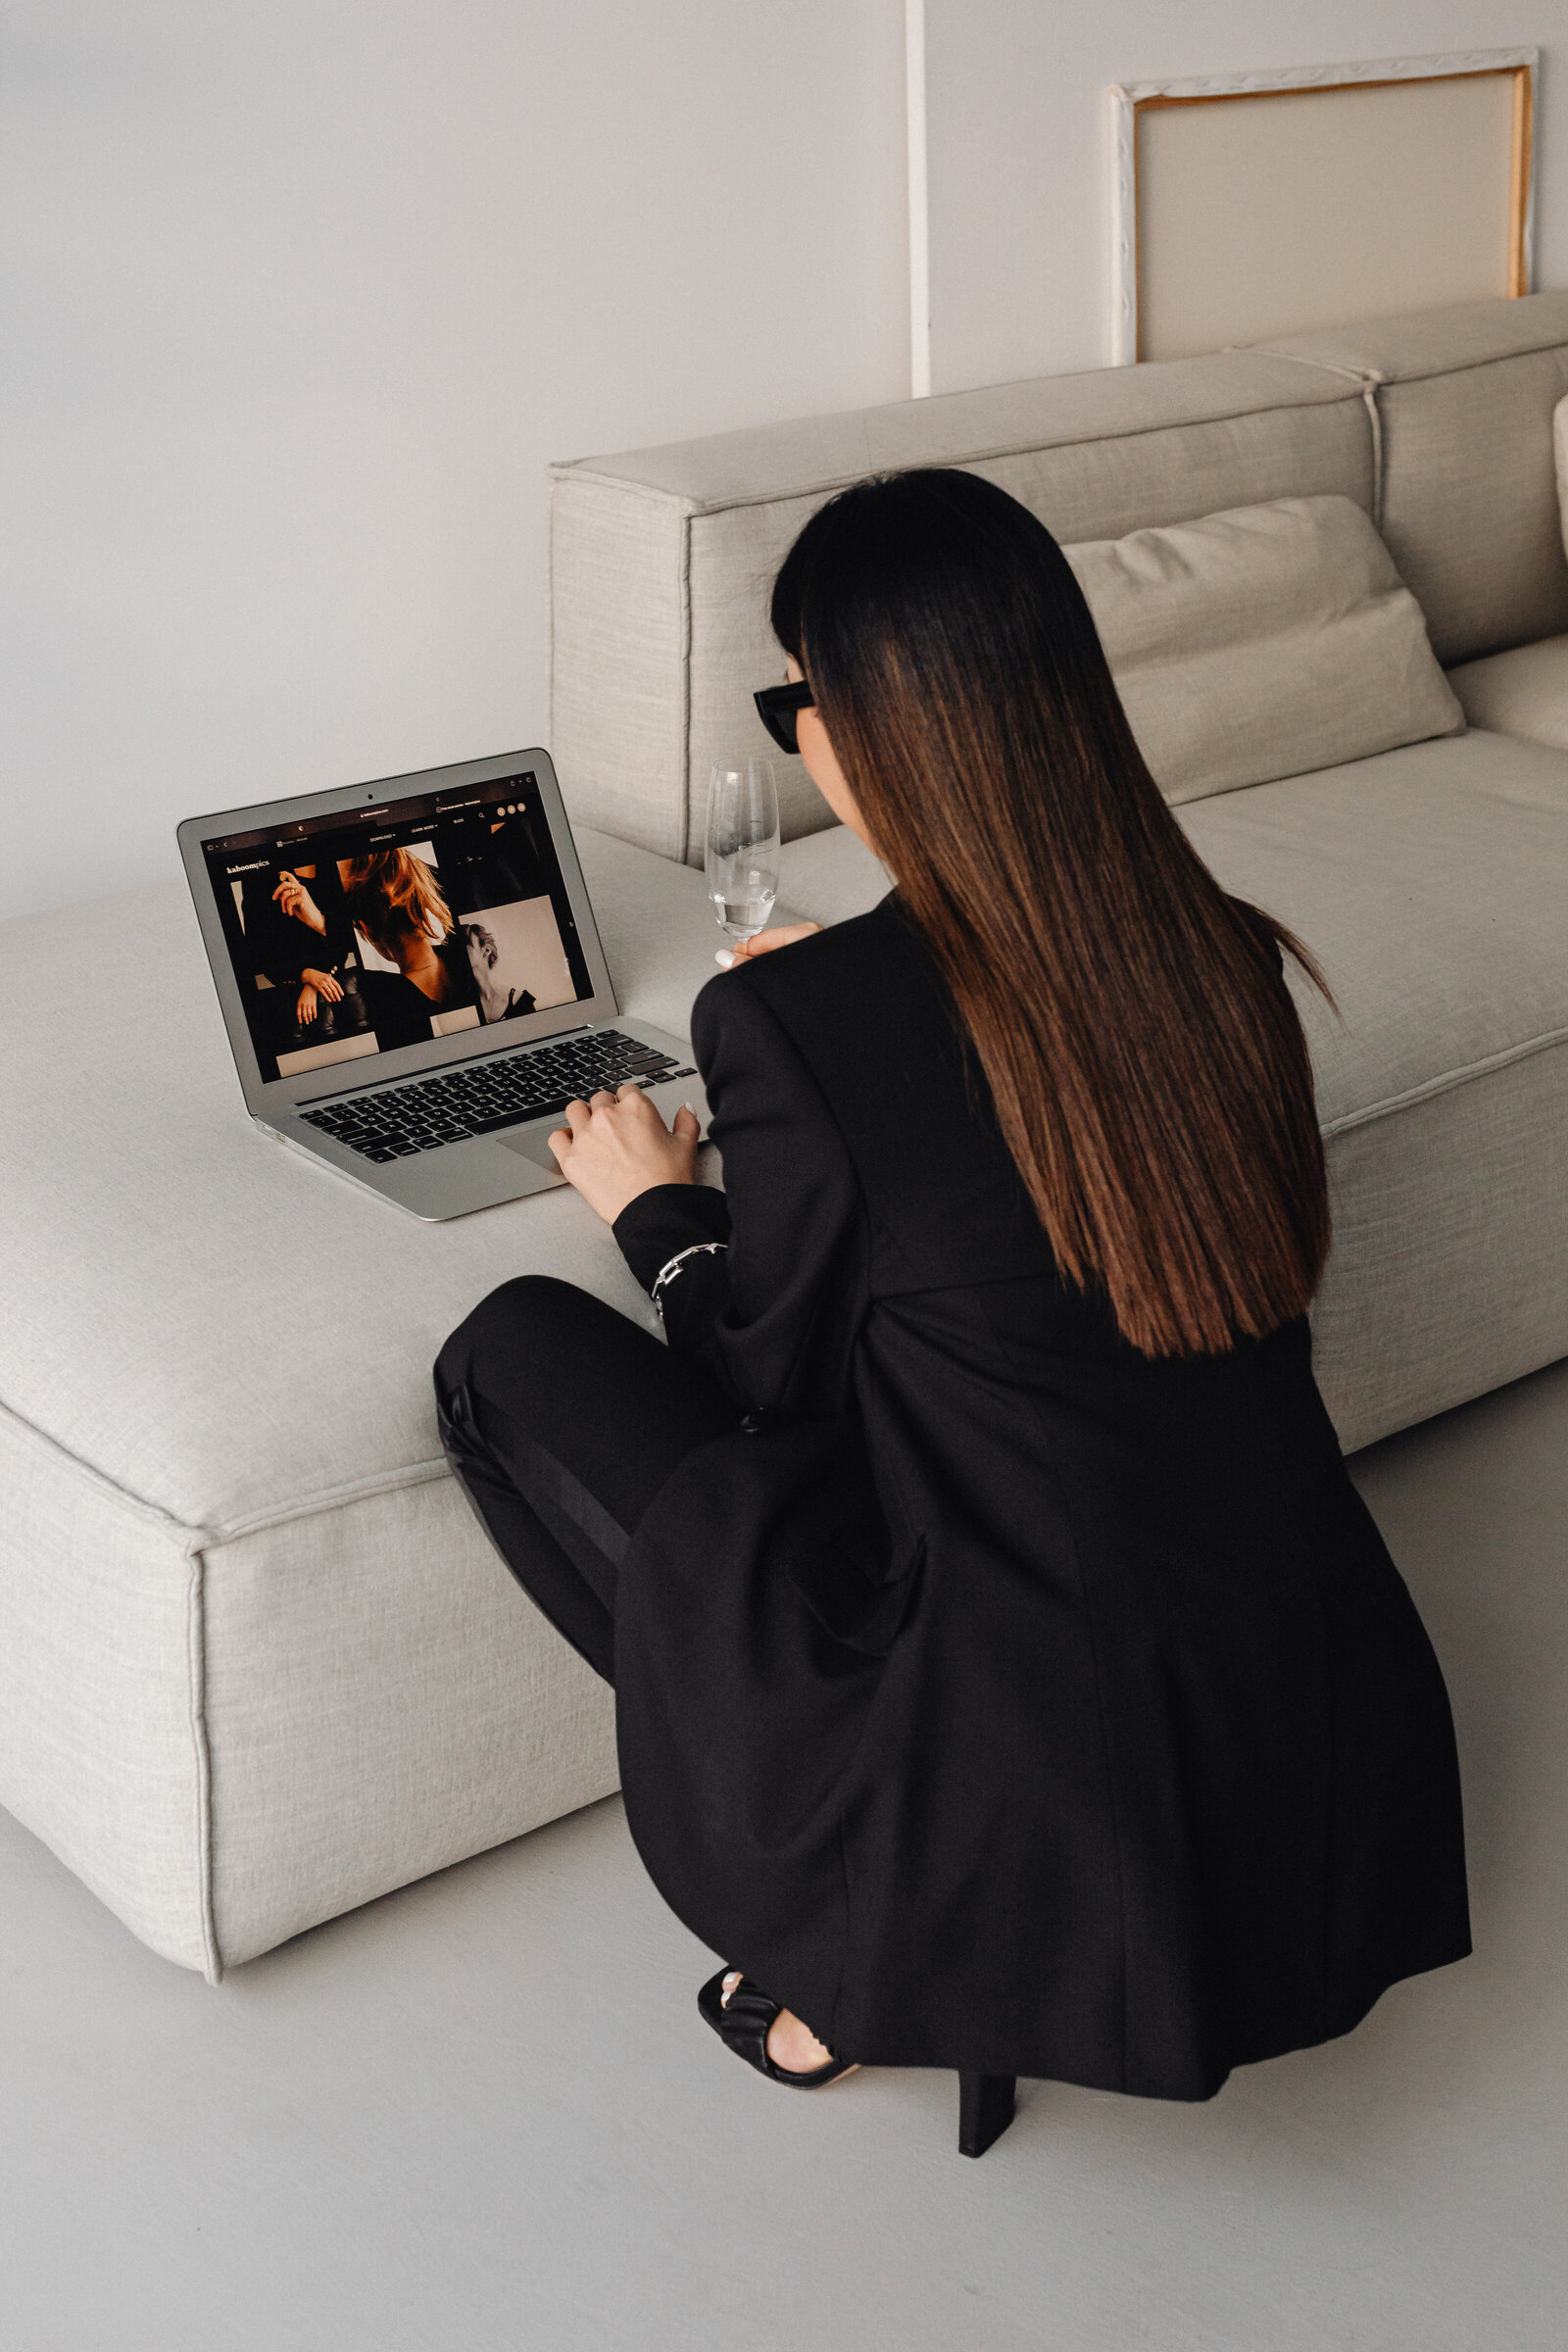 kaboompics_dark-classy-aesthetic-fashion-beautiful-asian-female-entrepreneur-in-black-suit-technology-and-devices-iphone-laptop-airpods-30039